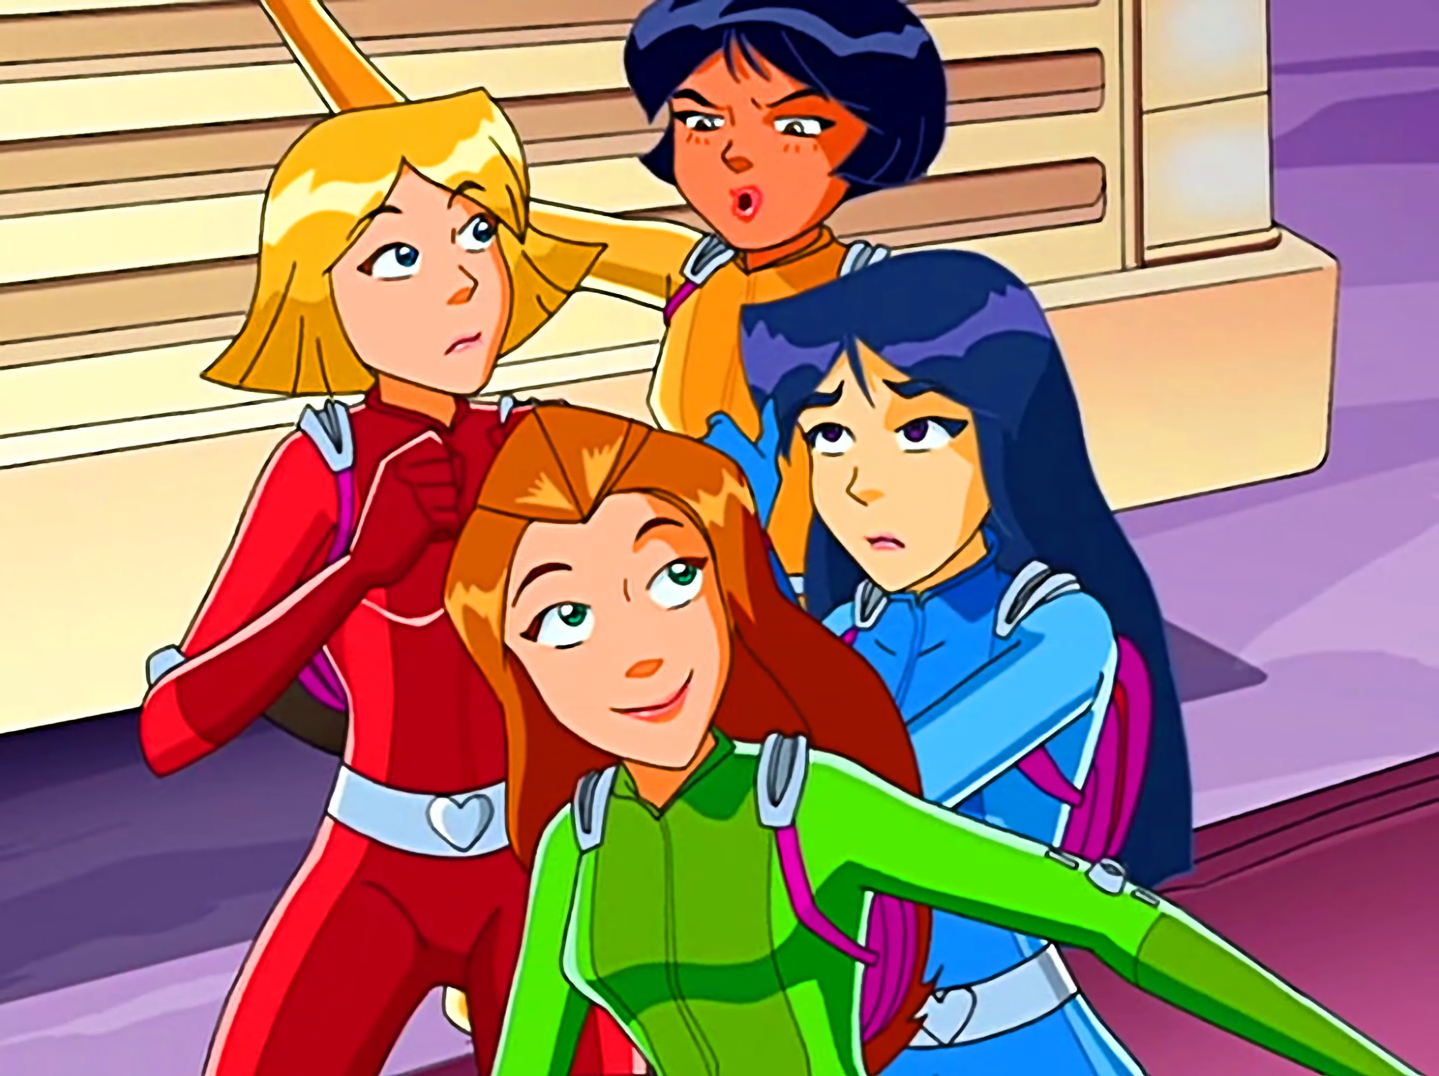 4. "Totally Spies!" - wide 2